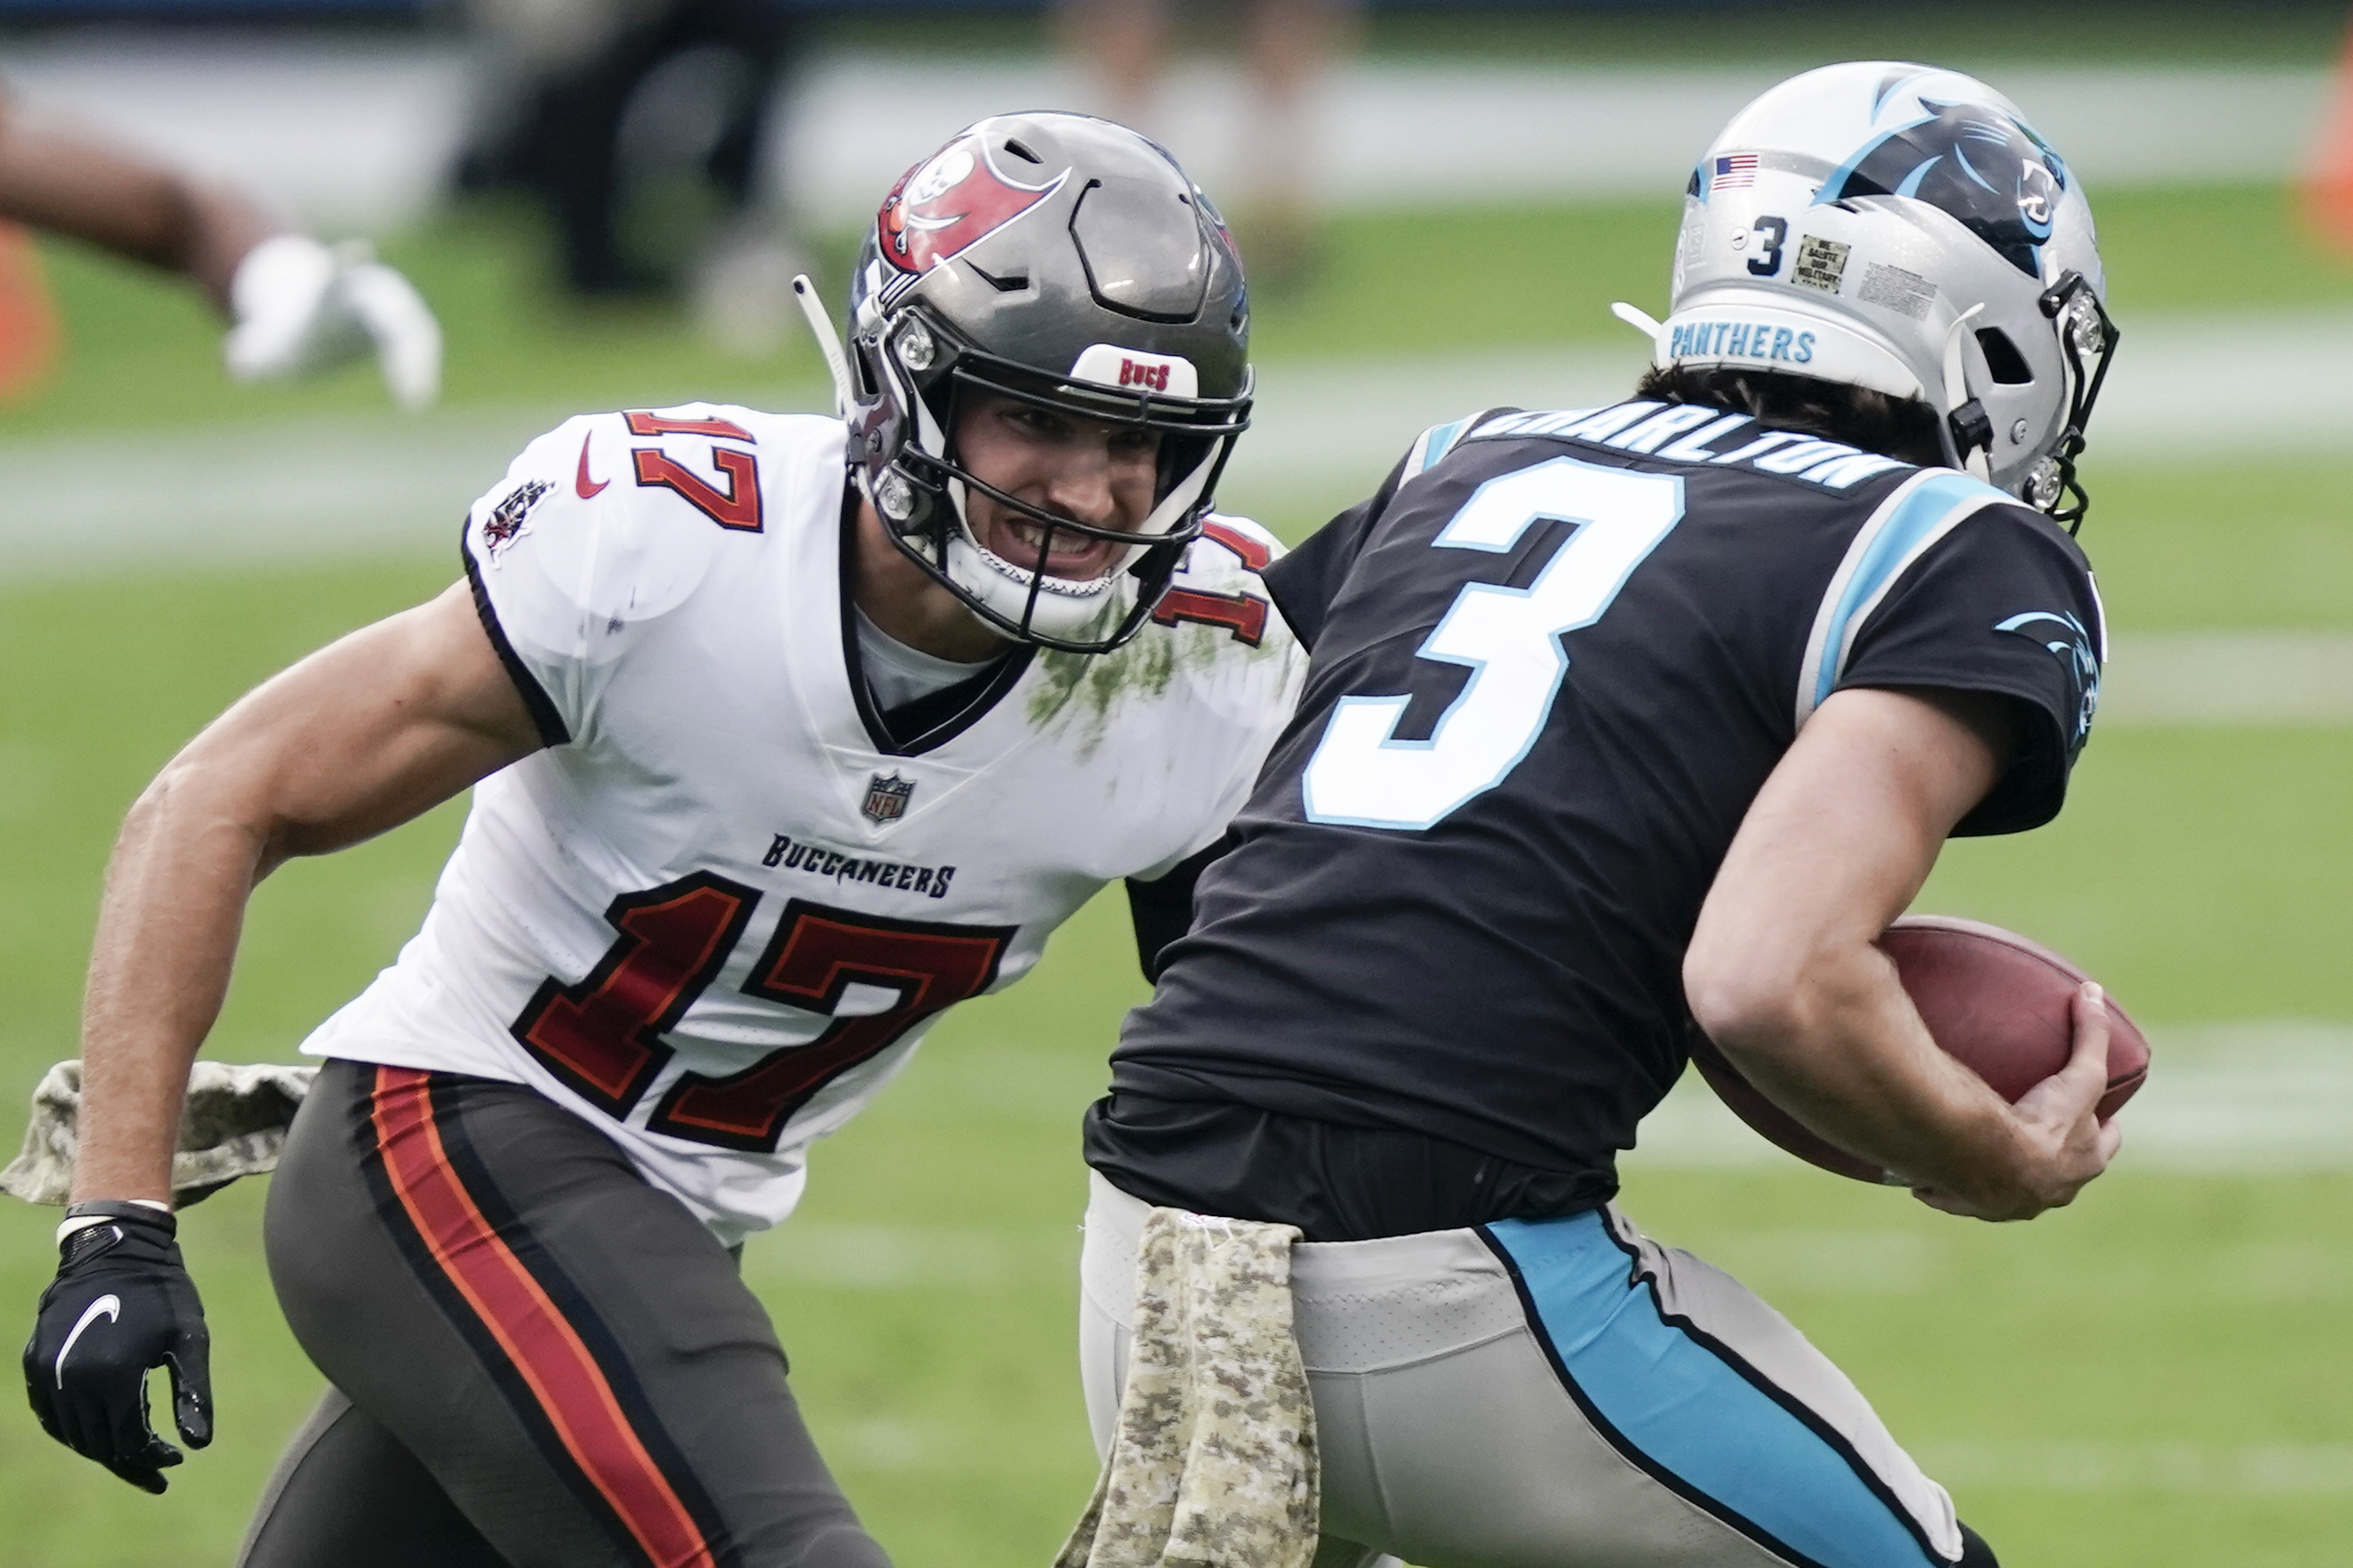 Carolina Panthers fall to Tampa Bay Buccaneers; now 3-7 on the